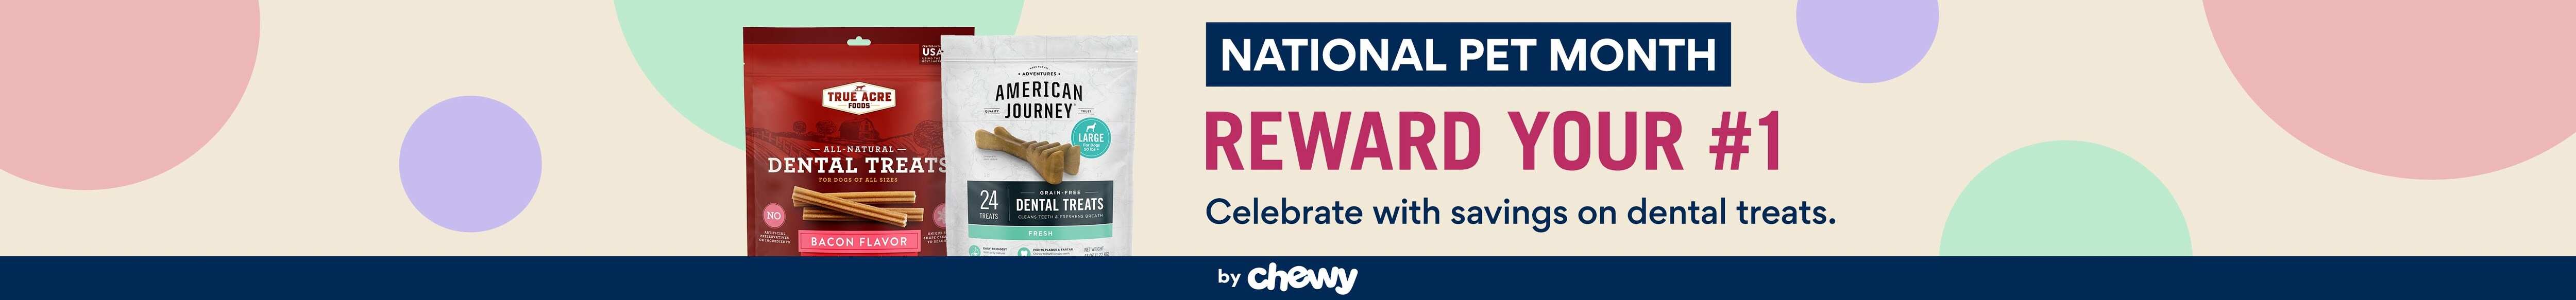 National Pet Month. Reward Your #1. Celebrate with savings on dental treats by Chewy.